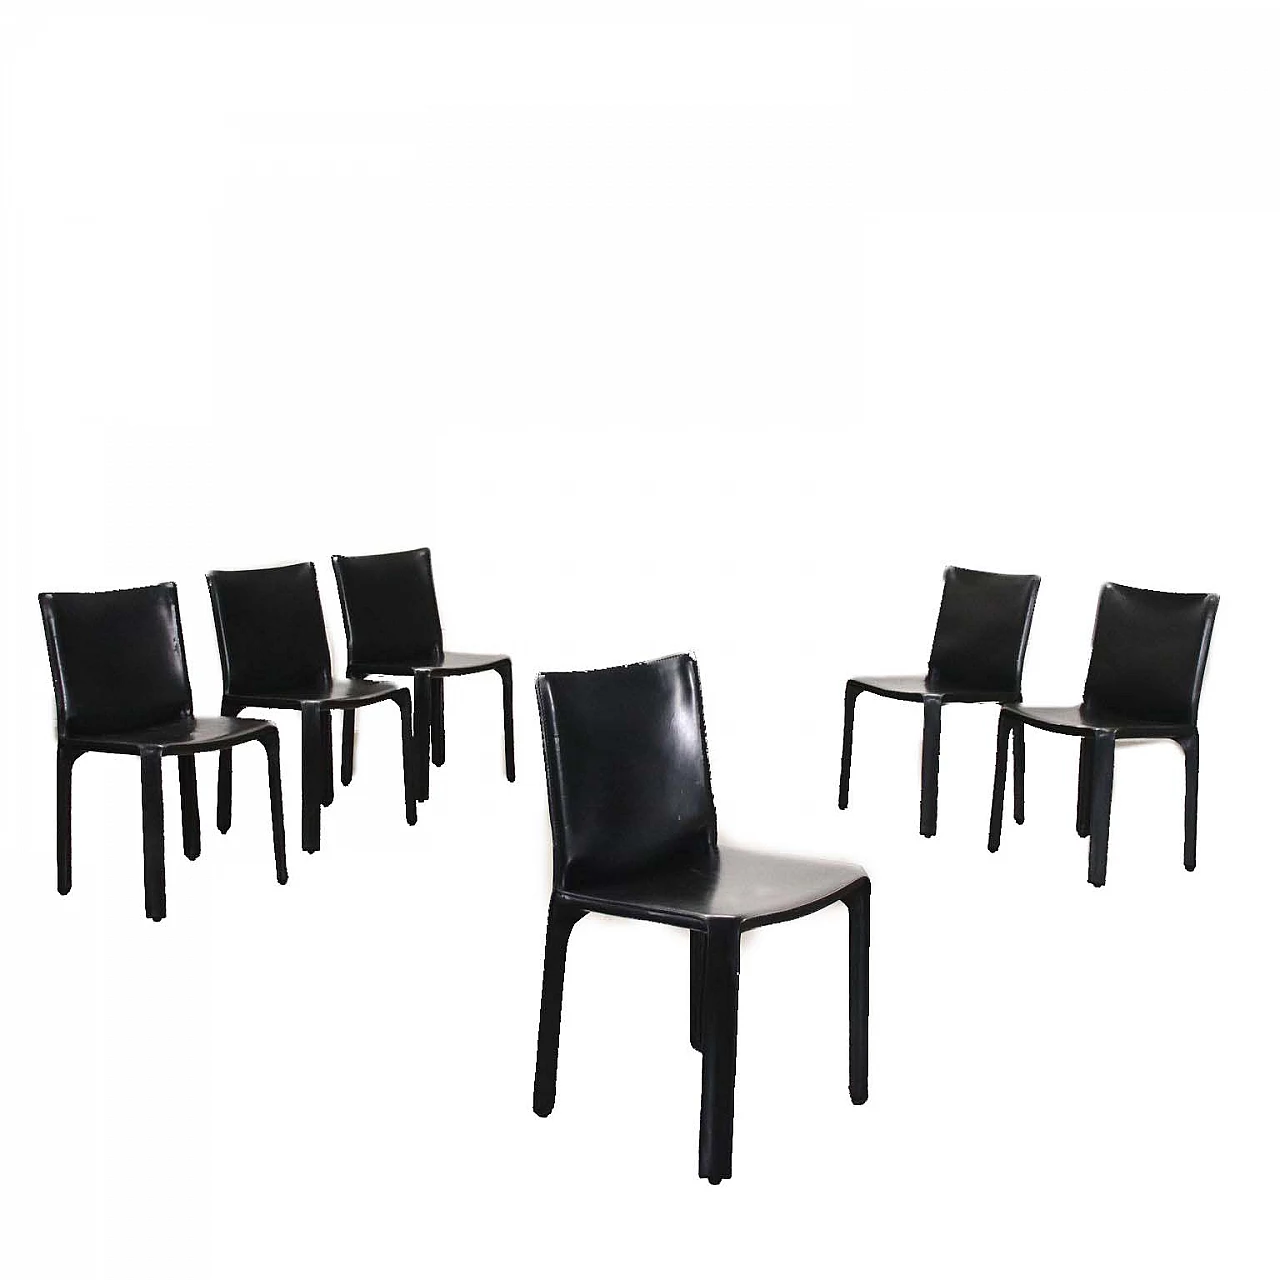 6 Chairs Cab 412 Mario Bellini for Cassina, '70s 1469620